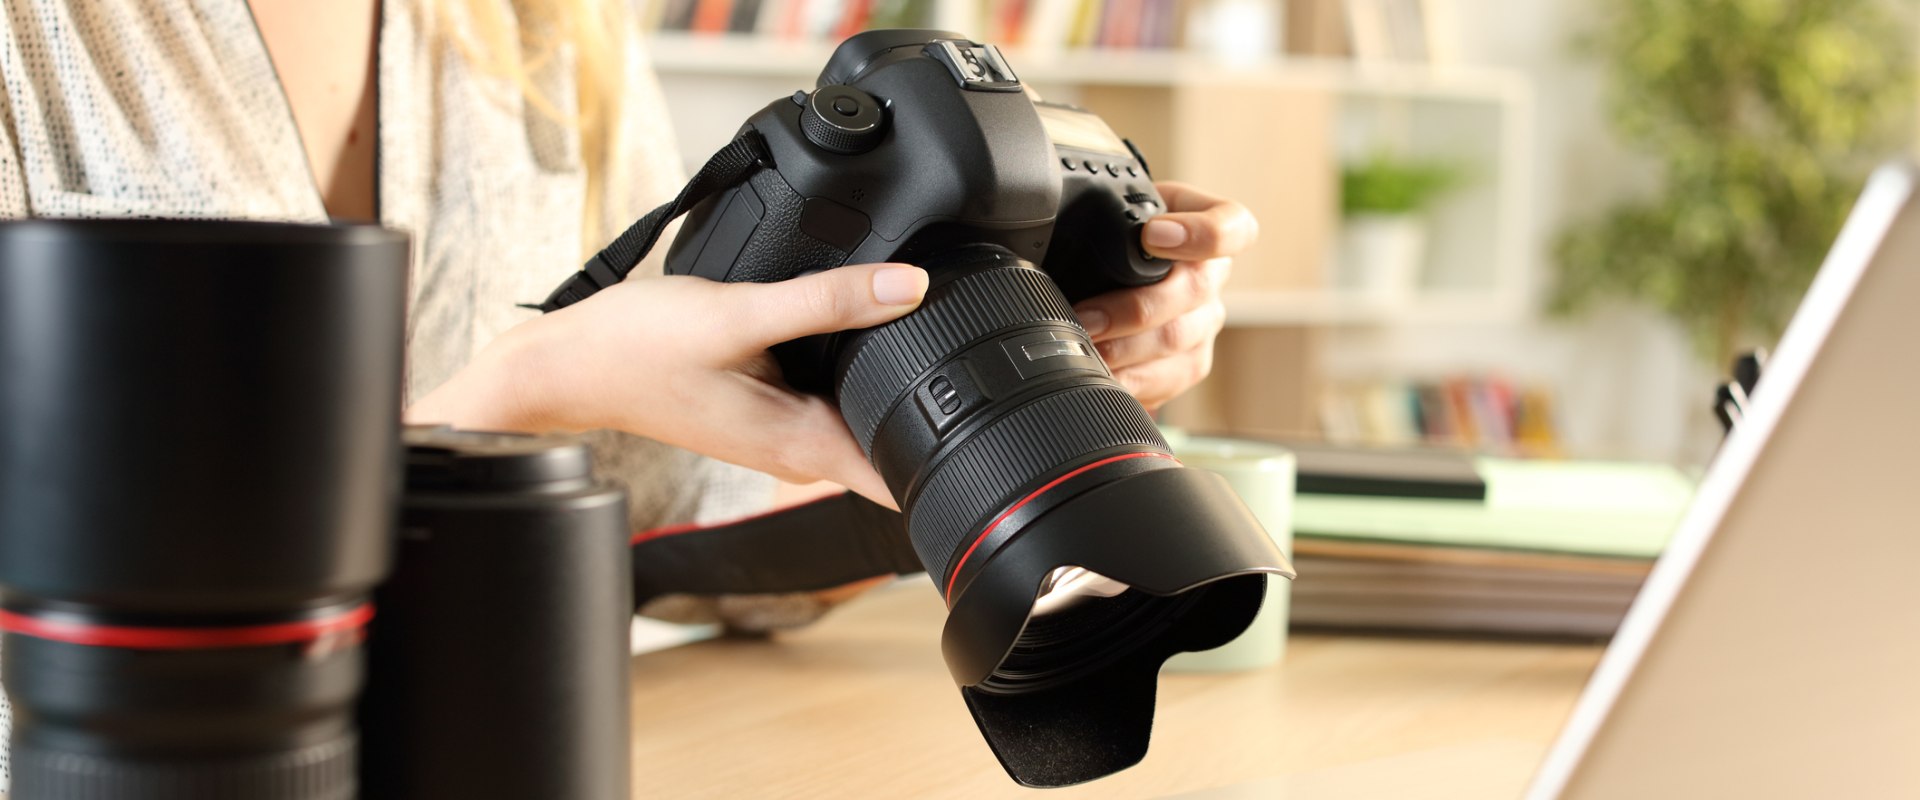 What Skills Do You Need to Become a Professional Product Photographer?